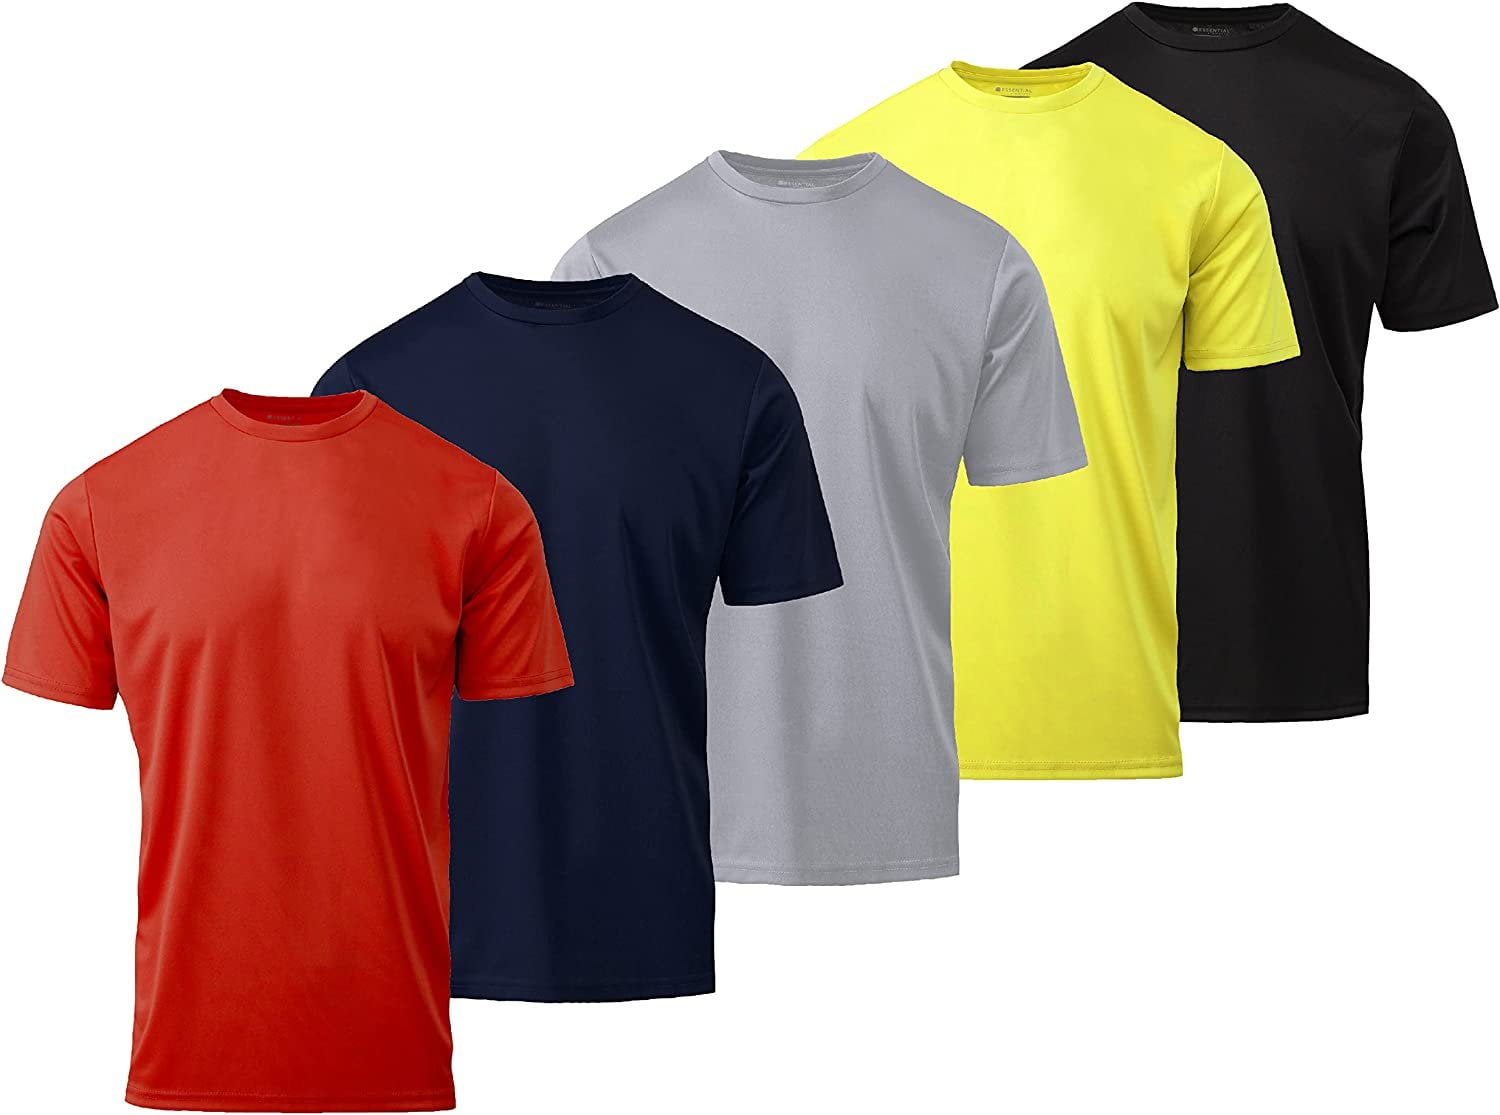 Mens Active T-Shirt - Quick-Dry Athletic Workout Training Stretch Crew ...